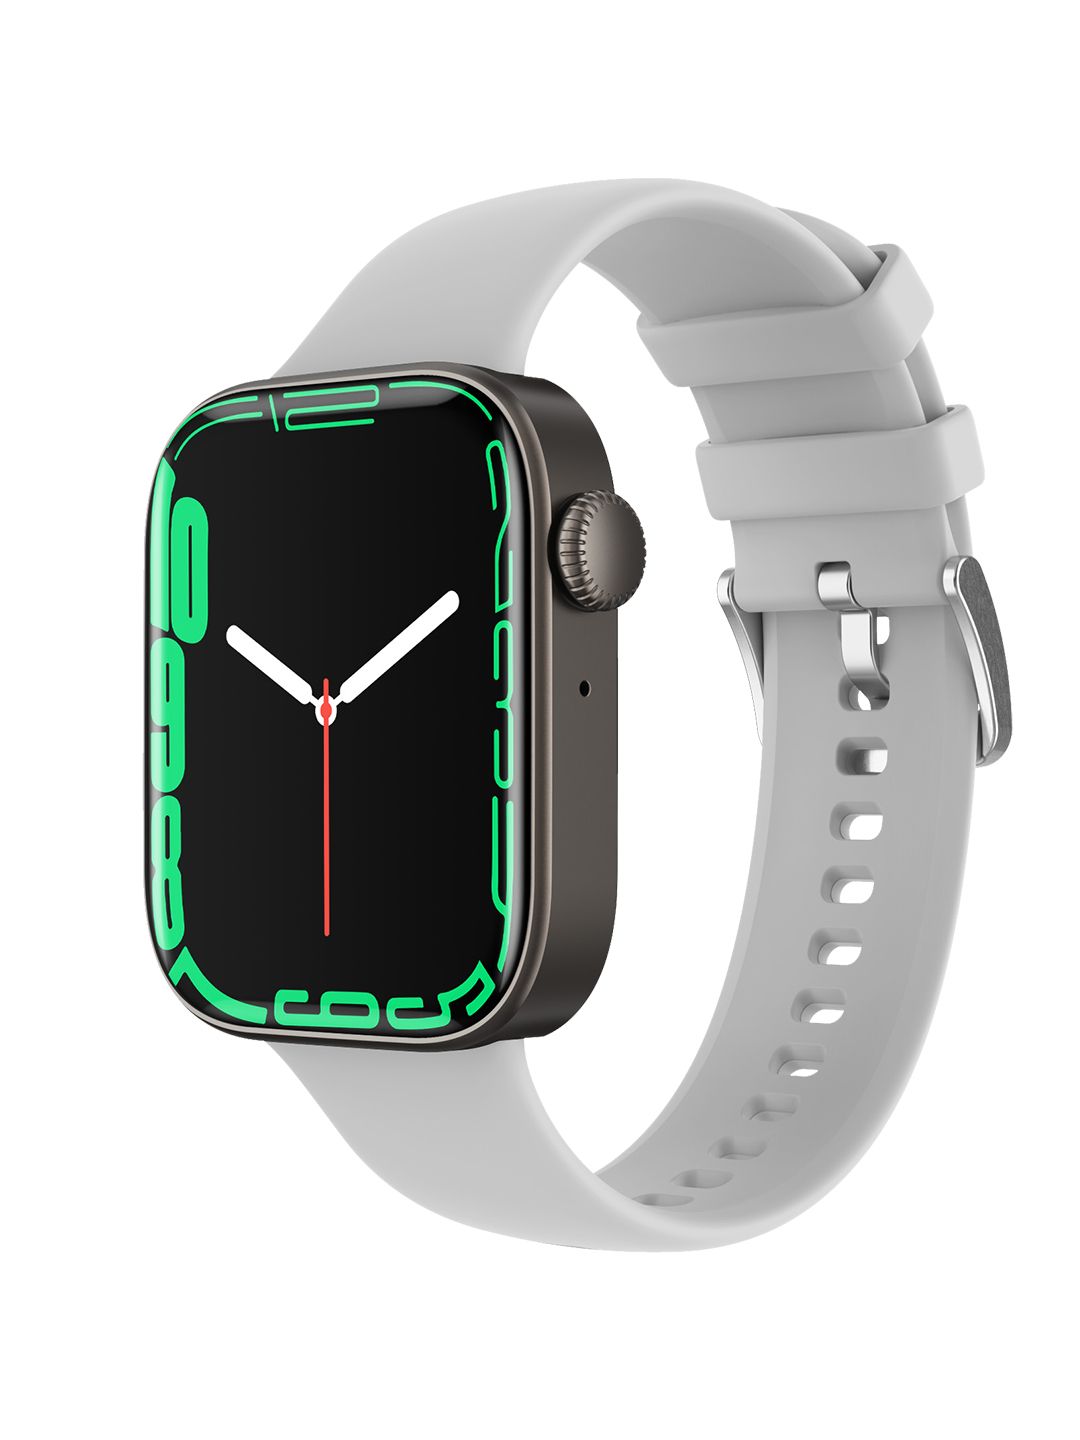 Fire-Boltt Grey Ring 2 Smartwatch 27BSWAAY-2 Price in India